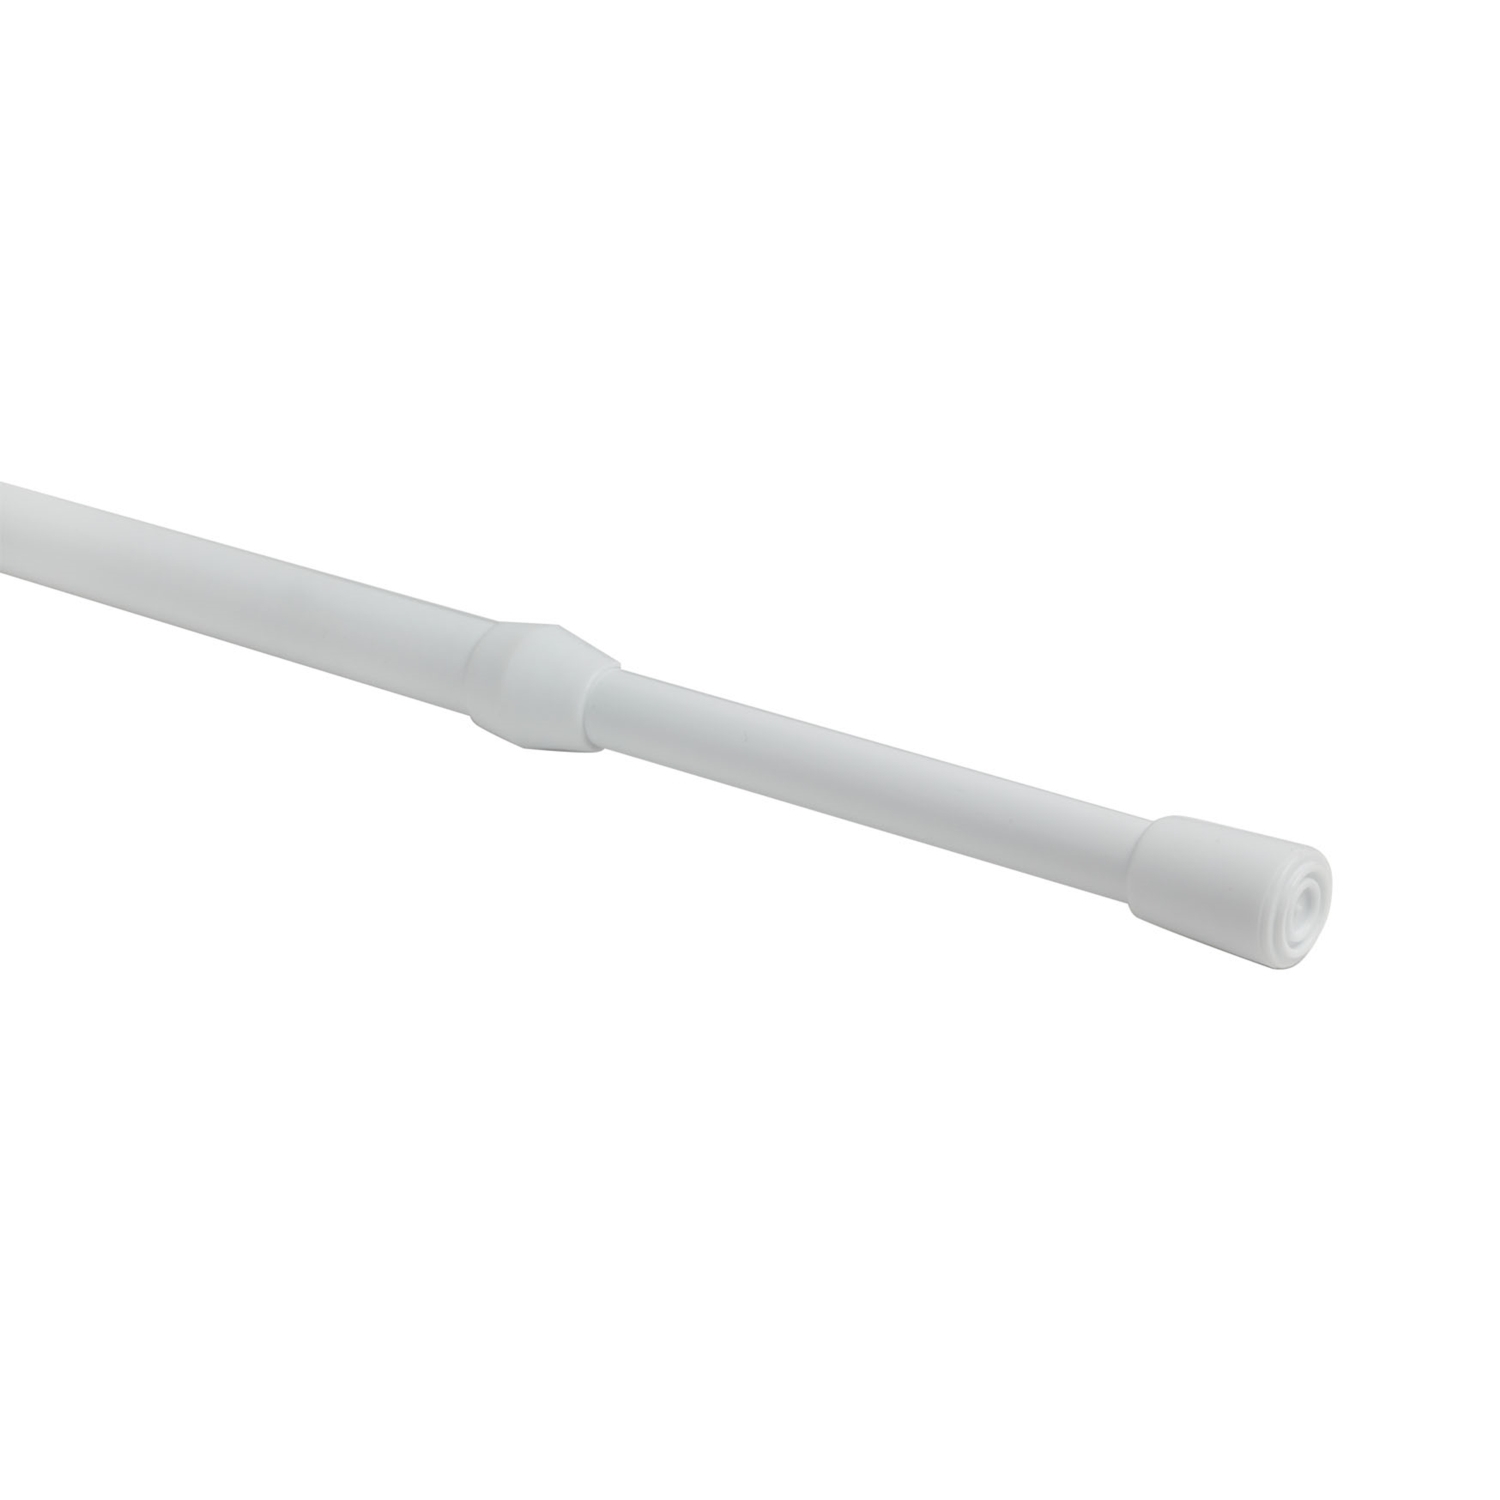 Simply 40-61cm Extendable White Tension Rod Image